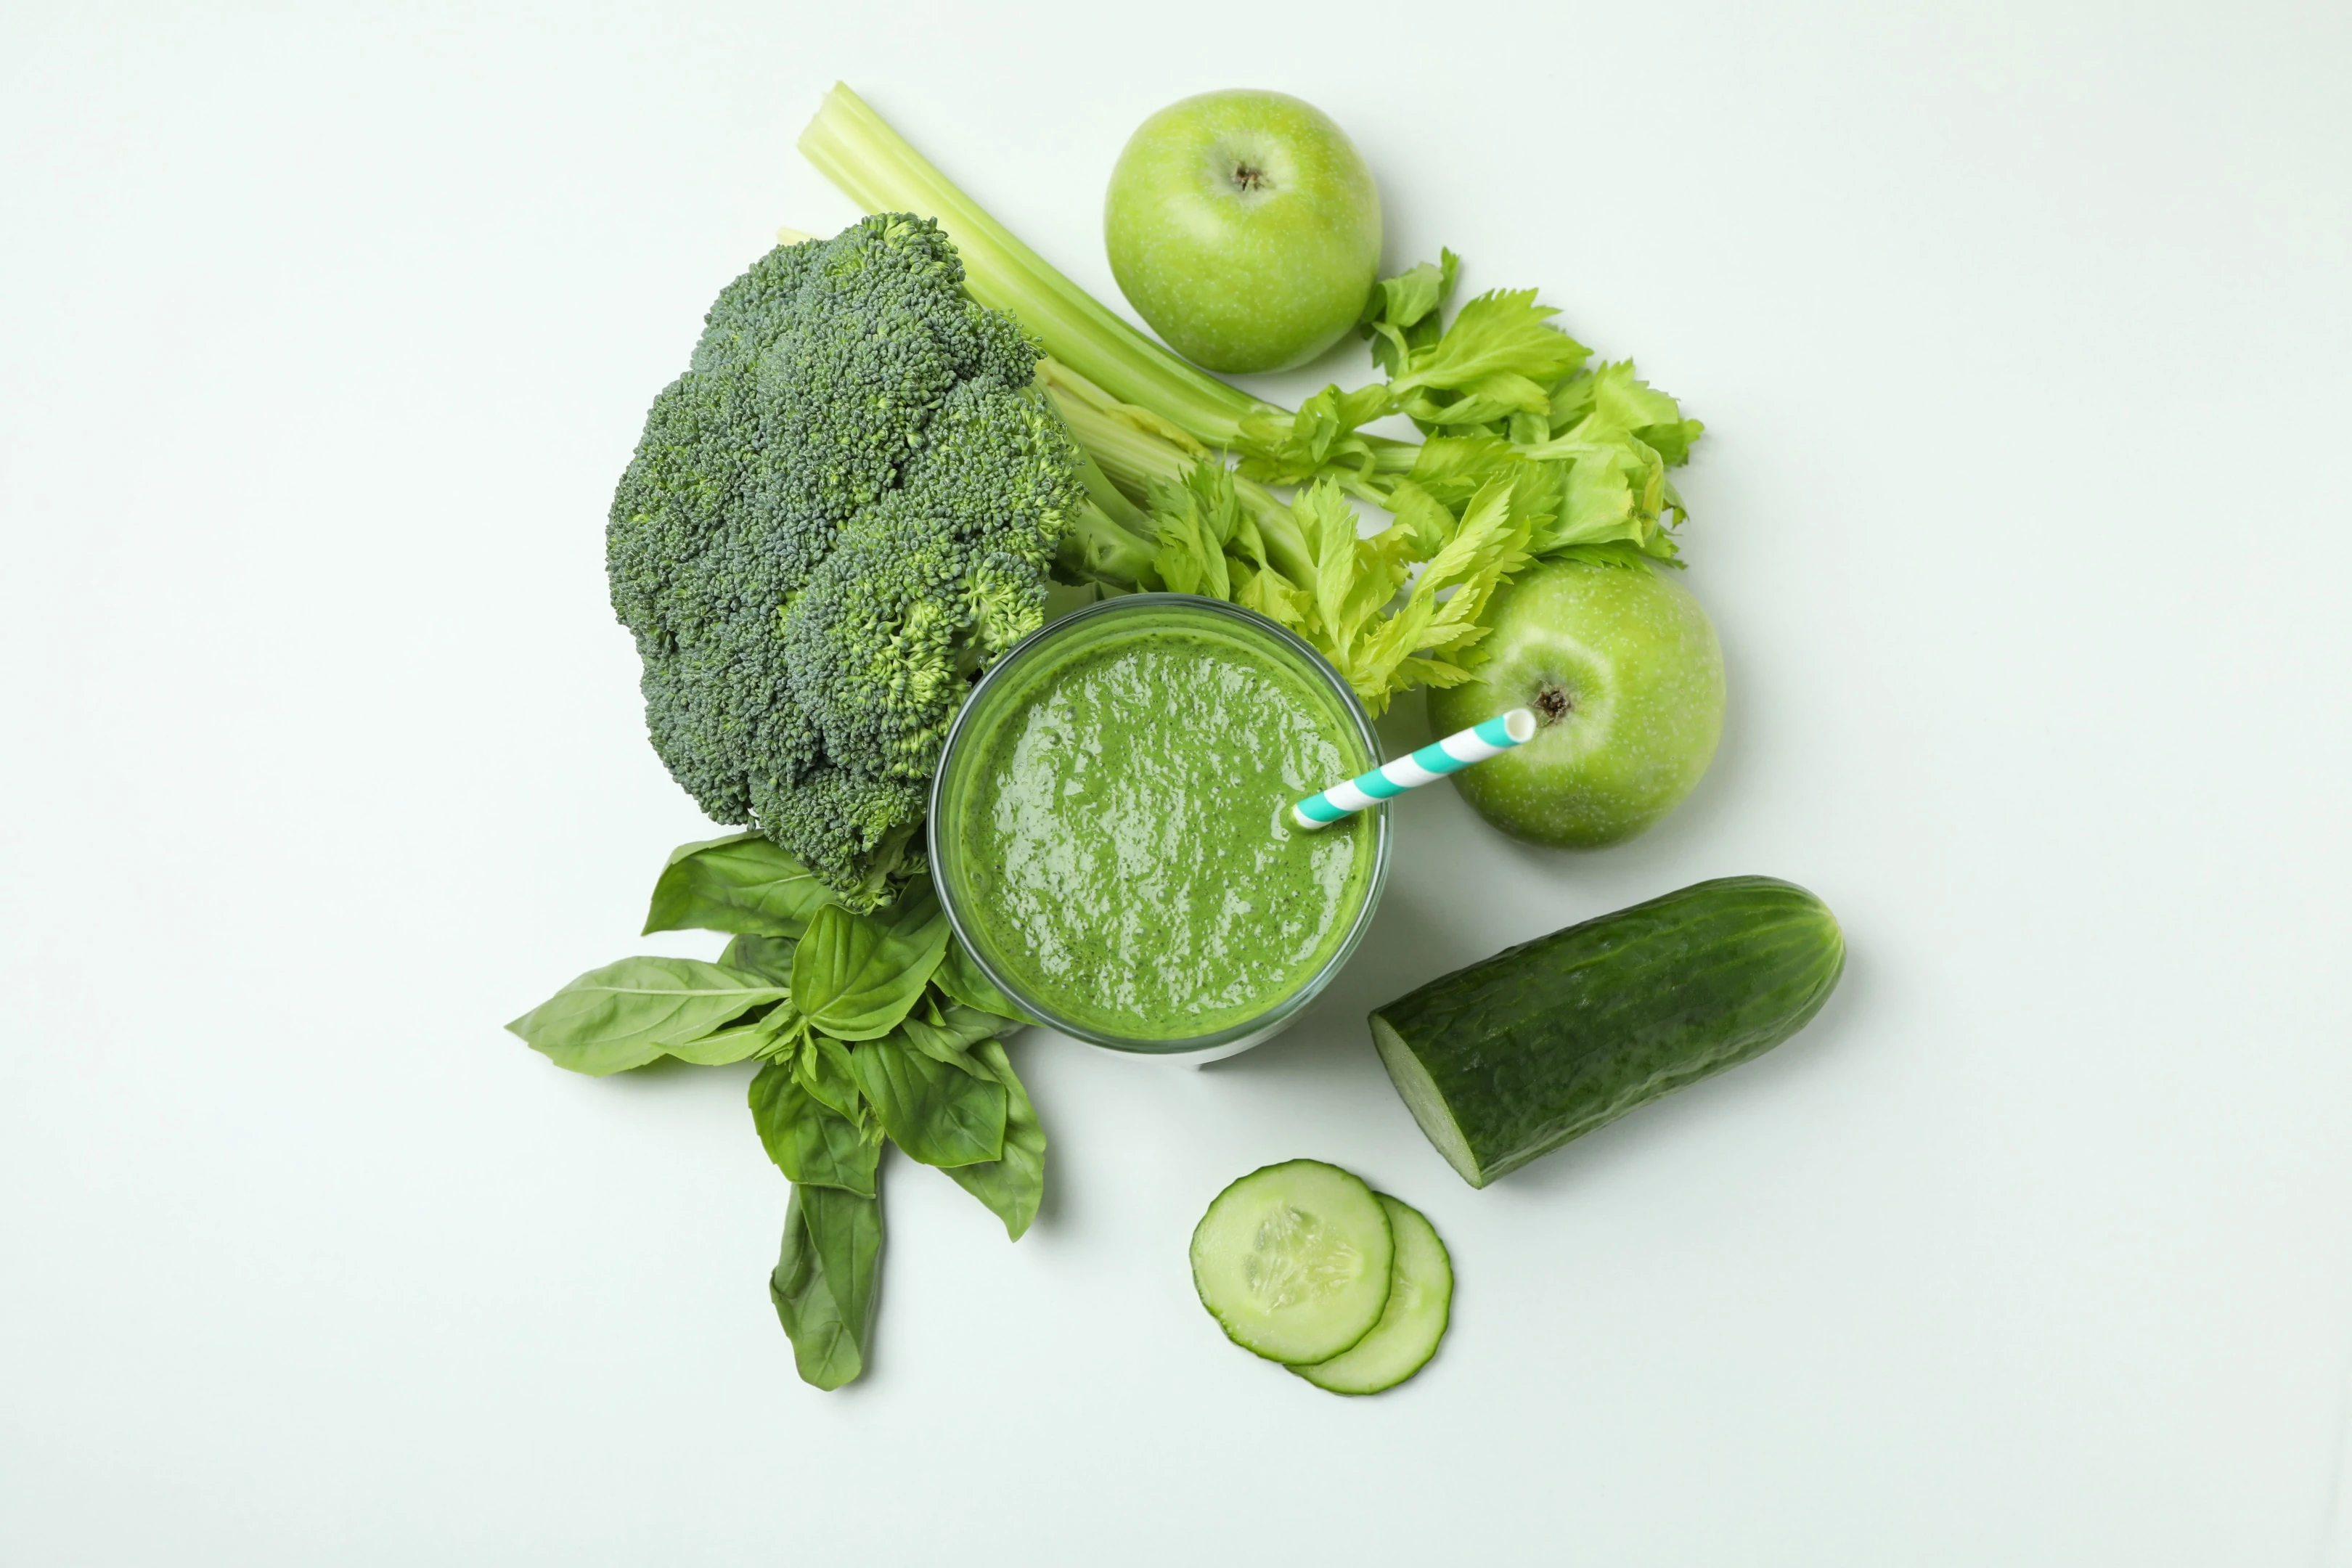 Glass of green smoothie and green leafy vegetable on white background